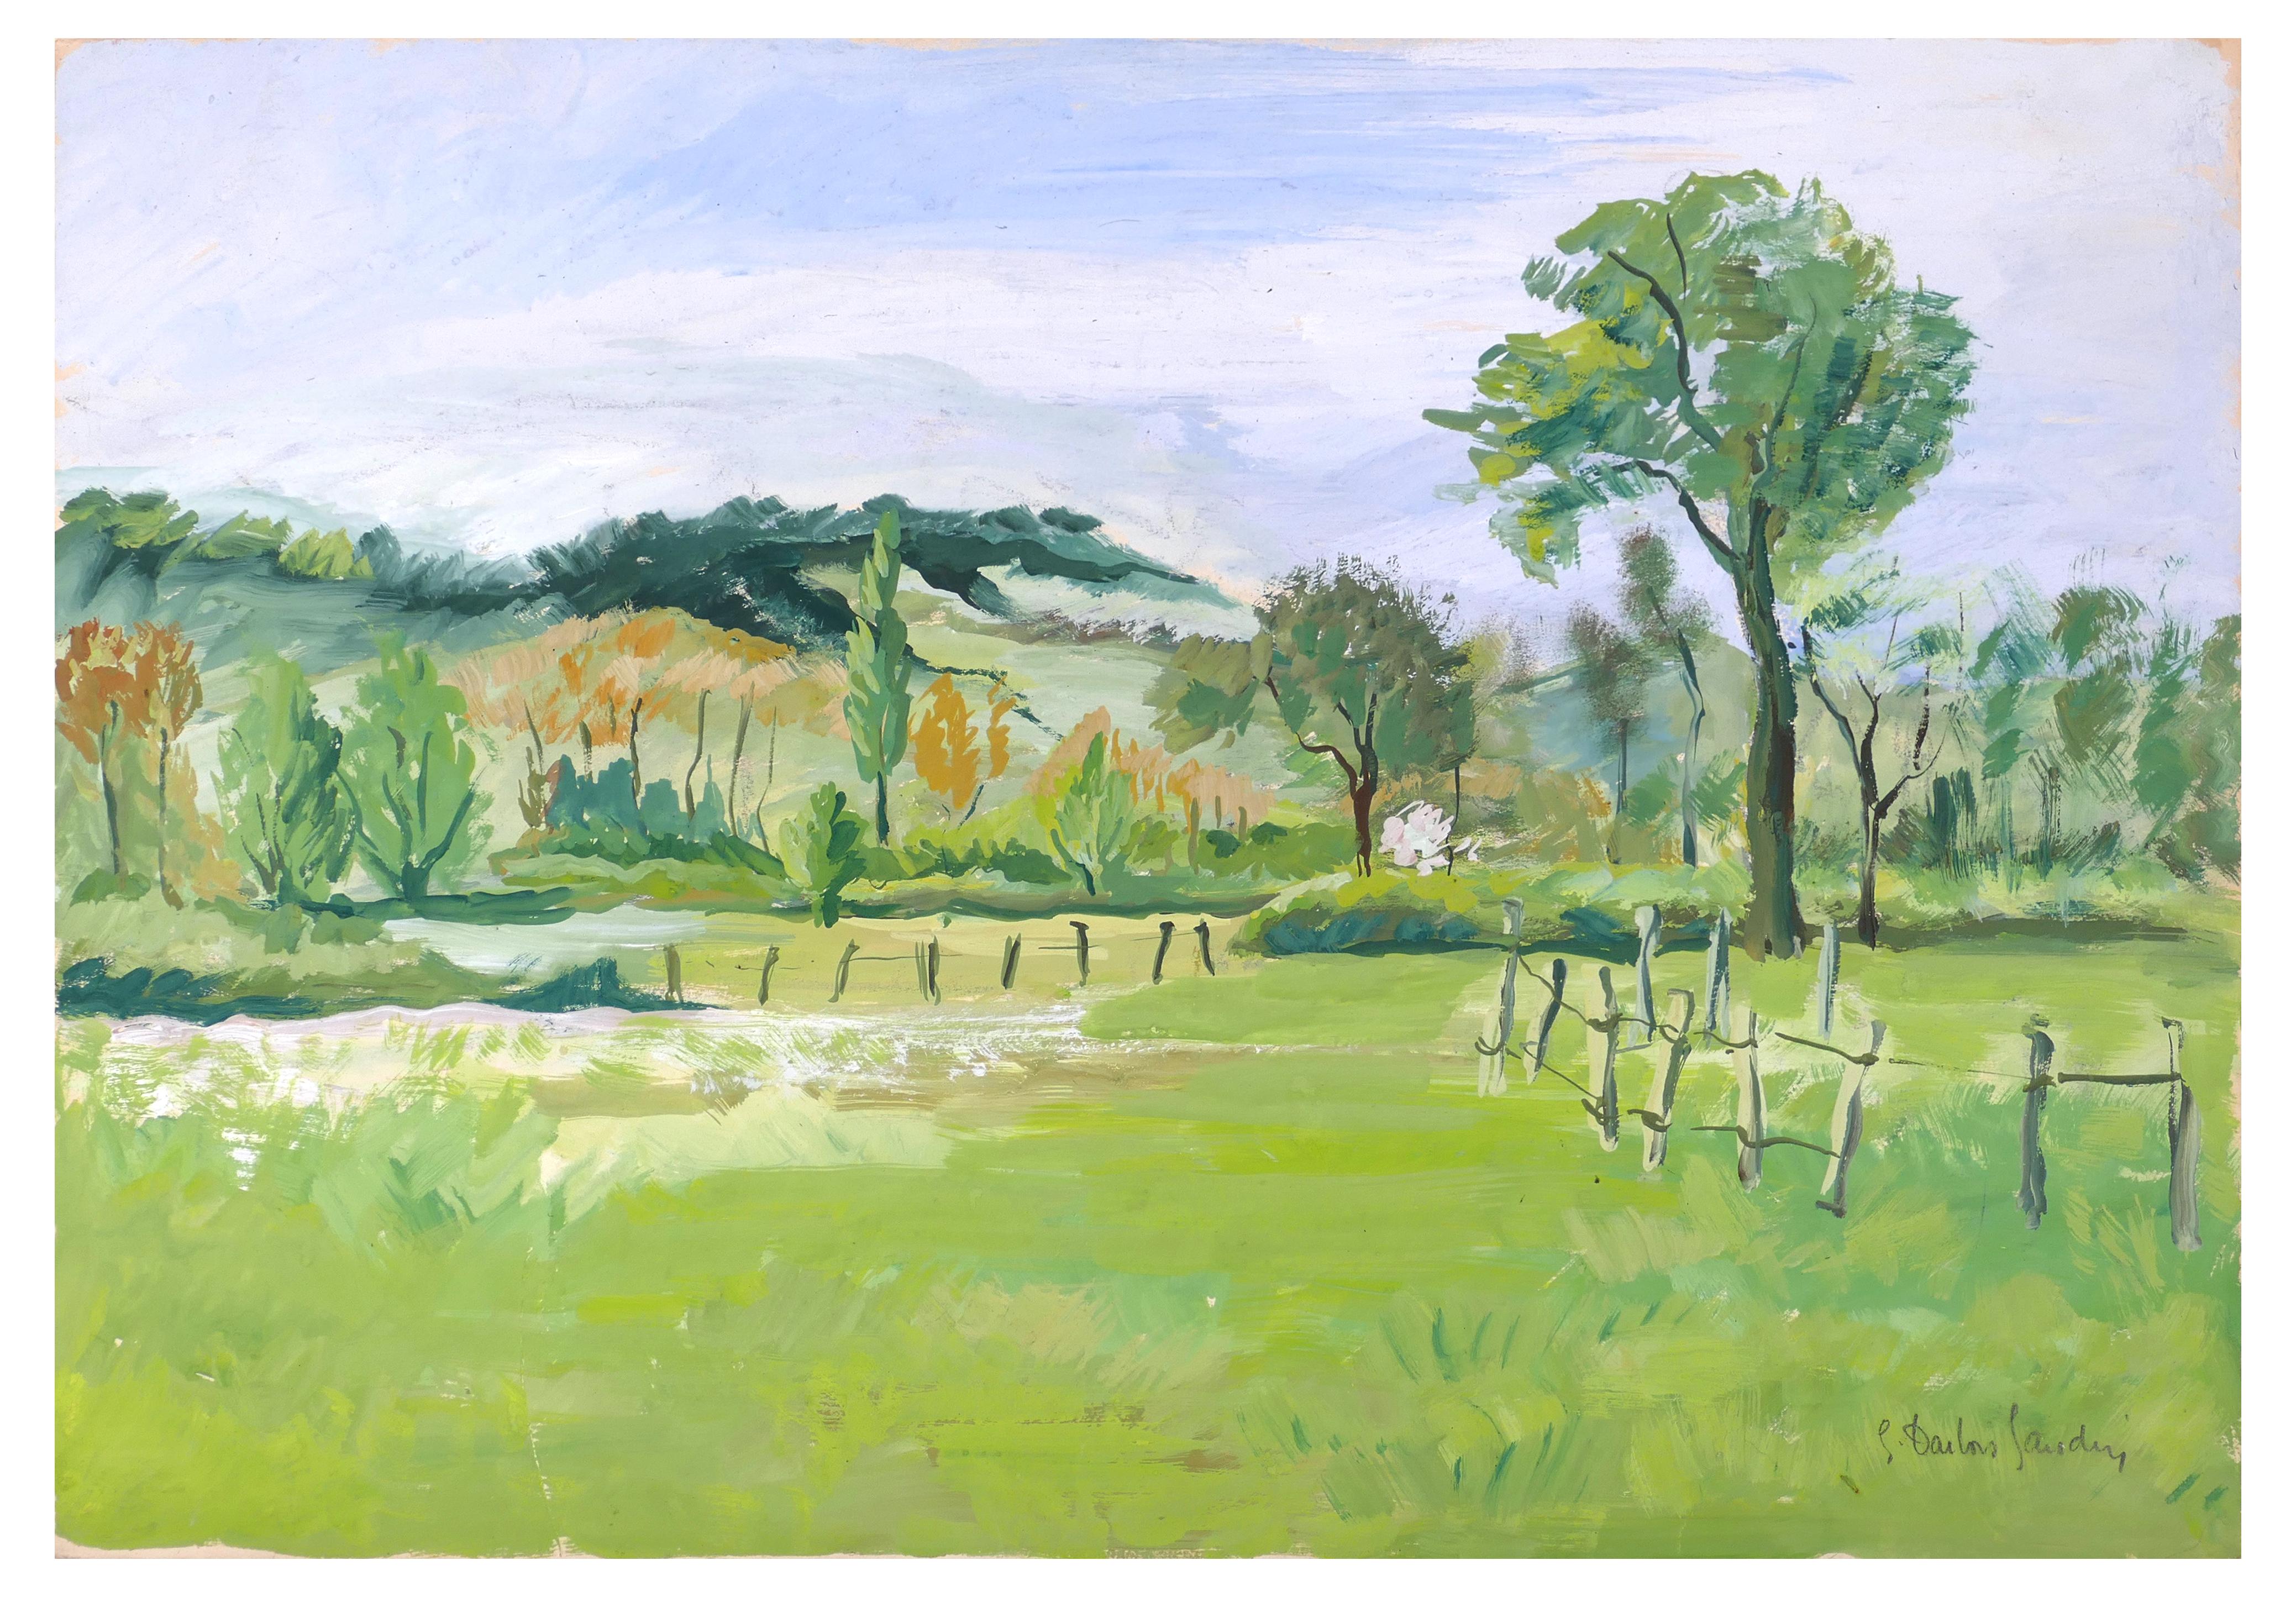 Germaine-Irene Darbois-Gaudin - Hilly Landscape - Acrylic on Paper by G.-I.  Darbois-Gaudin - 1970s For Sale at 1stDibs | hilly landscapes in south  africa, gaudin painter